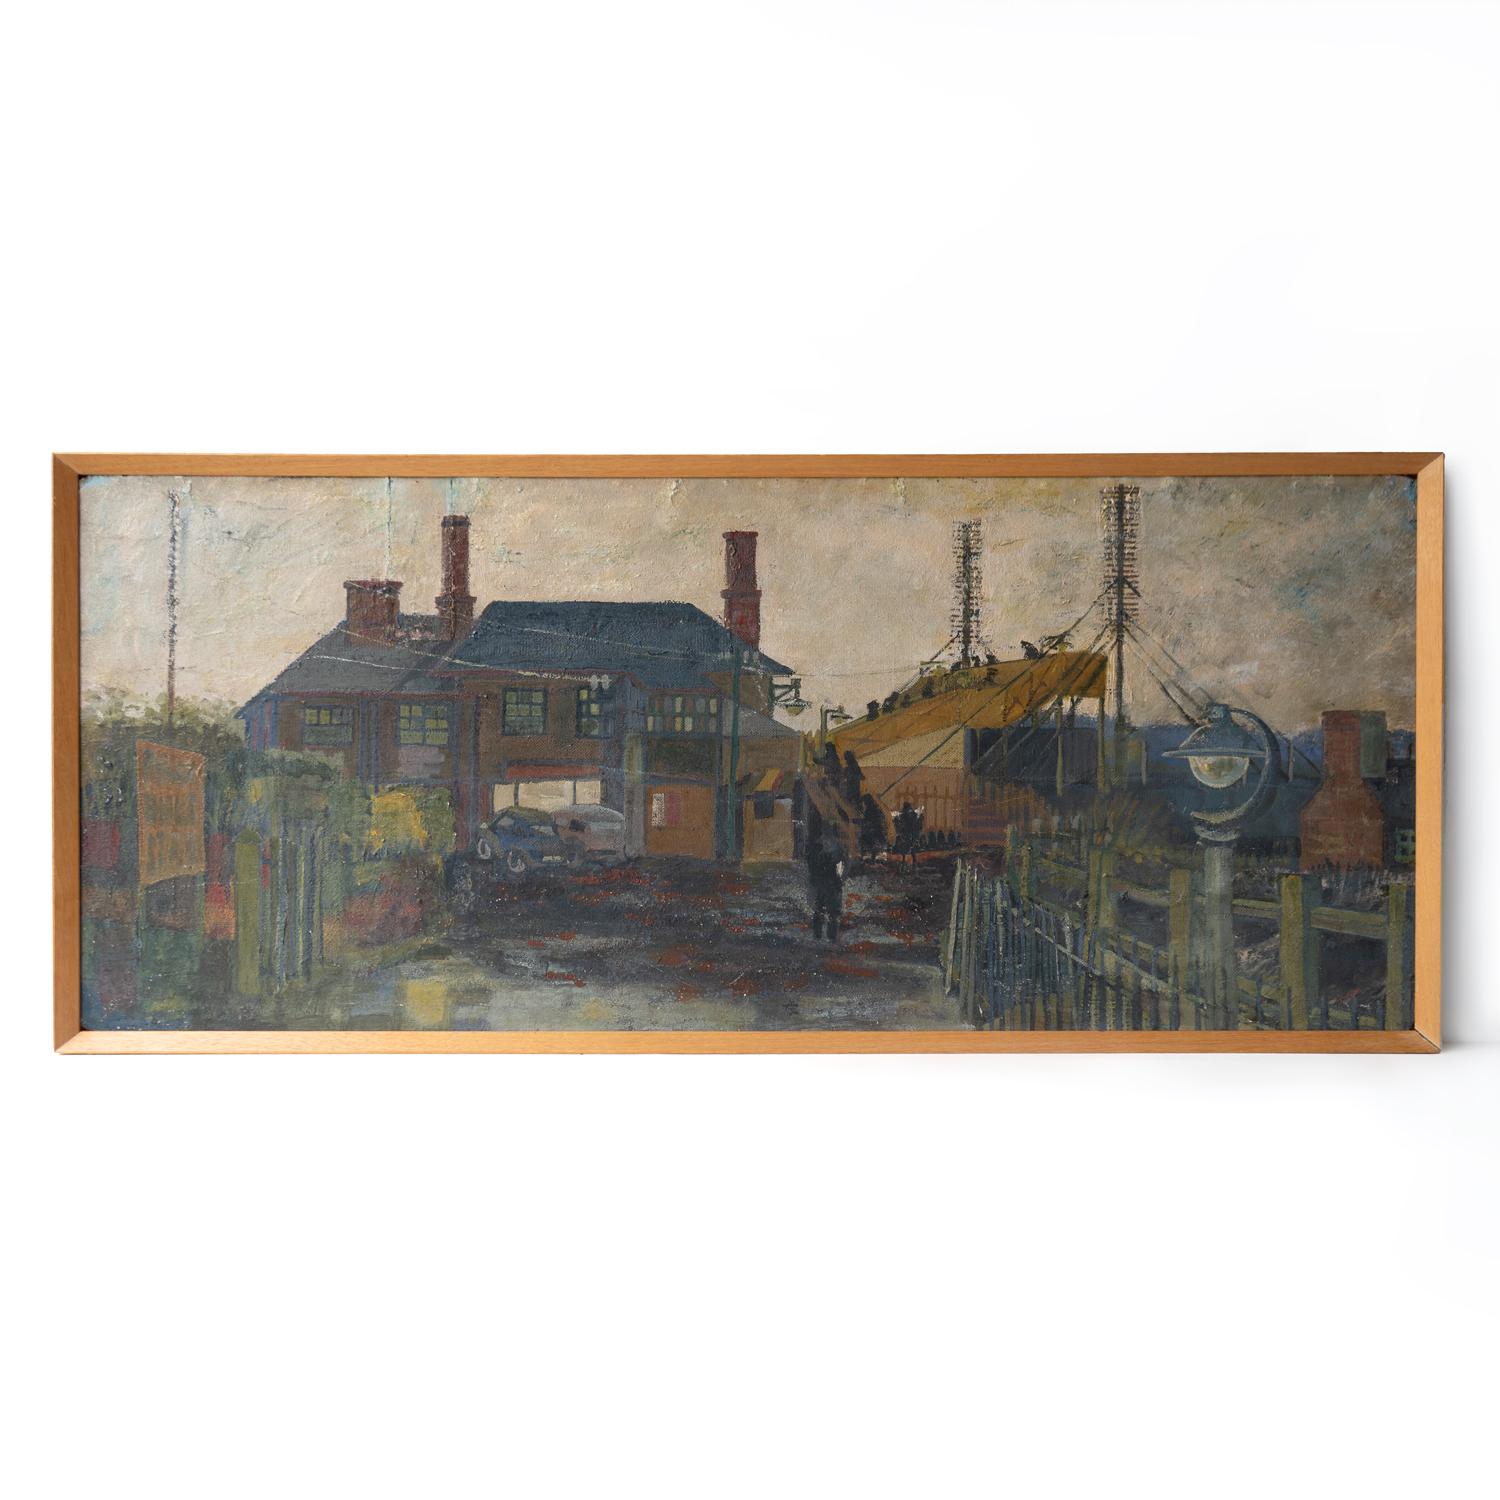 ANTIQUE ORIGINAL OIL ON BOARD PAINTING 

Depicting an evocative early morning scene against a backdrop of industrial buildings, railings, vehicles, electricity infrastructure and Lowry-esque figures crossing a metal bridge heading to work. 

Painted